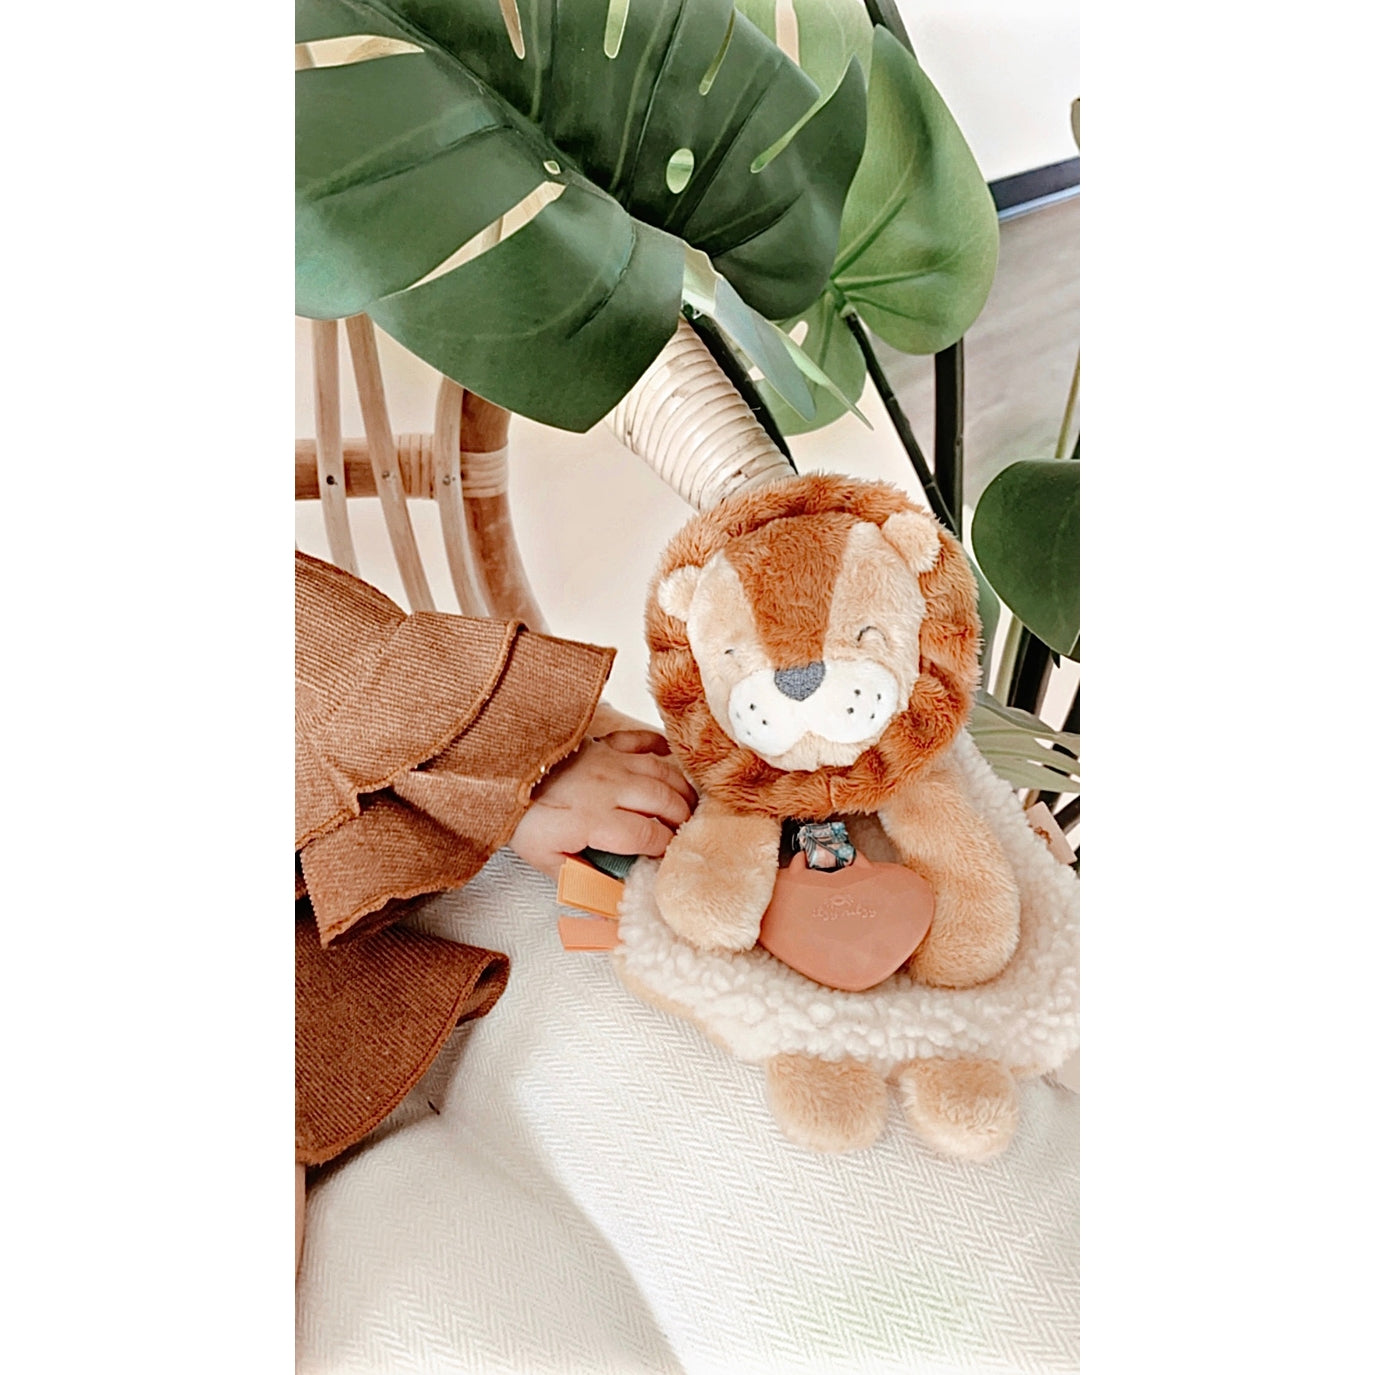 Itzy Friends Itzy Lovey Plush with Silicone Teether Toy: Buddy the Lion